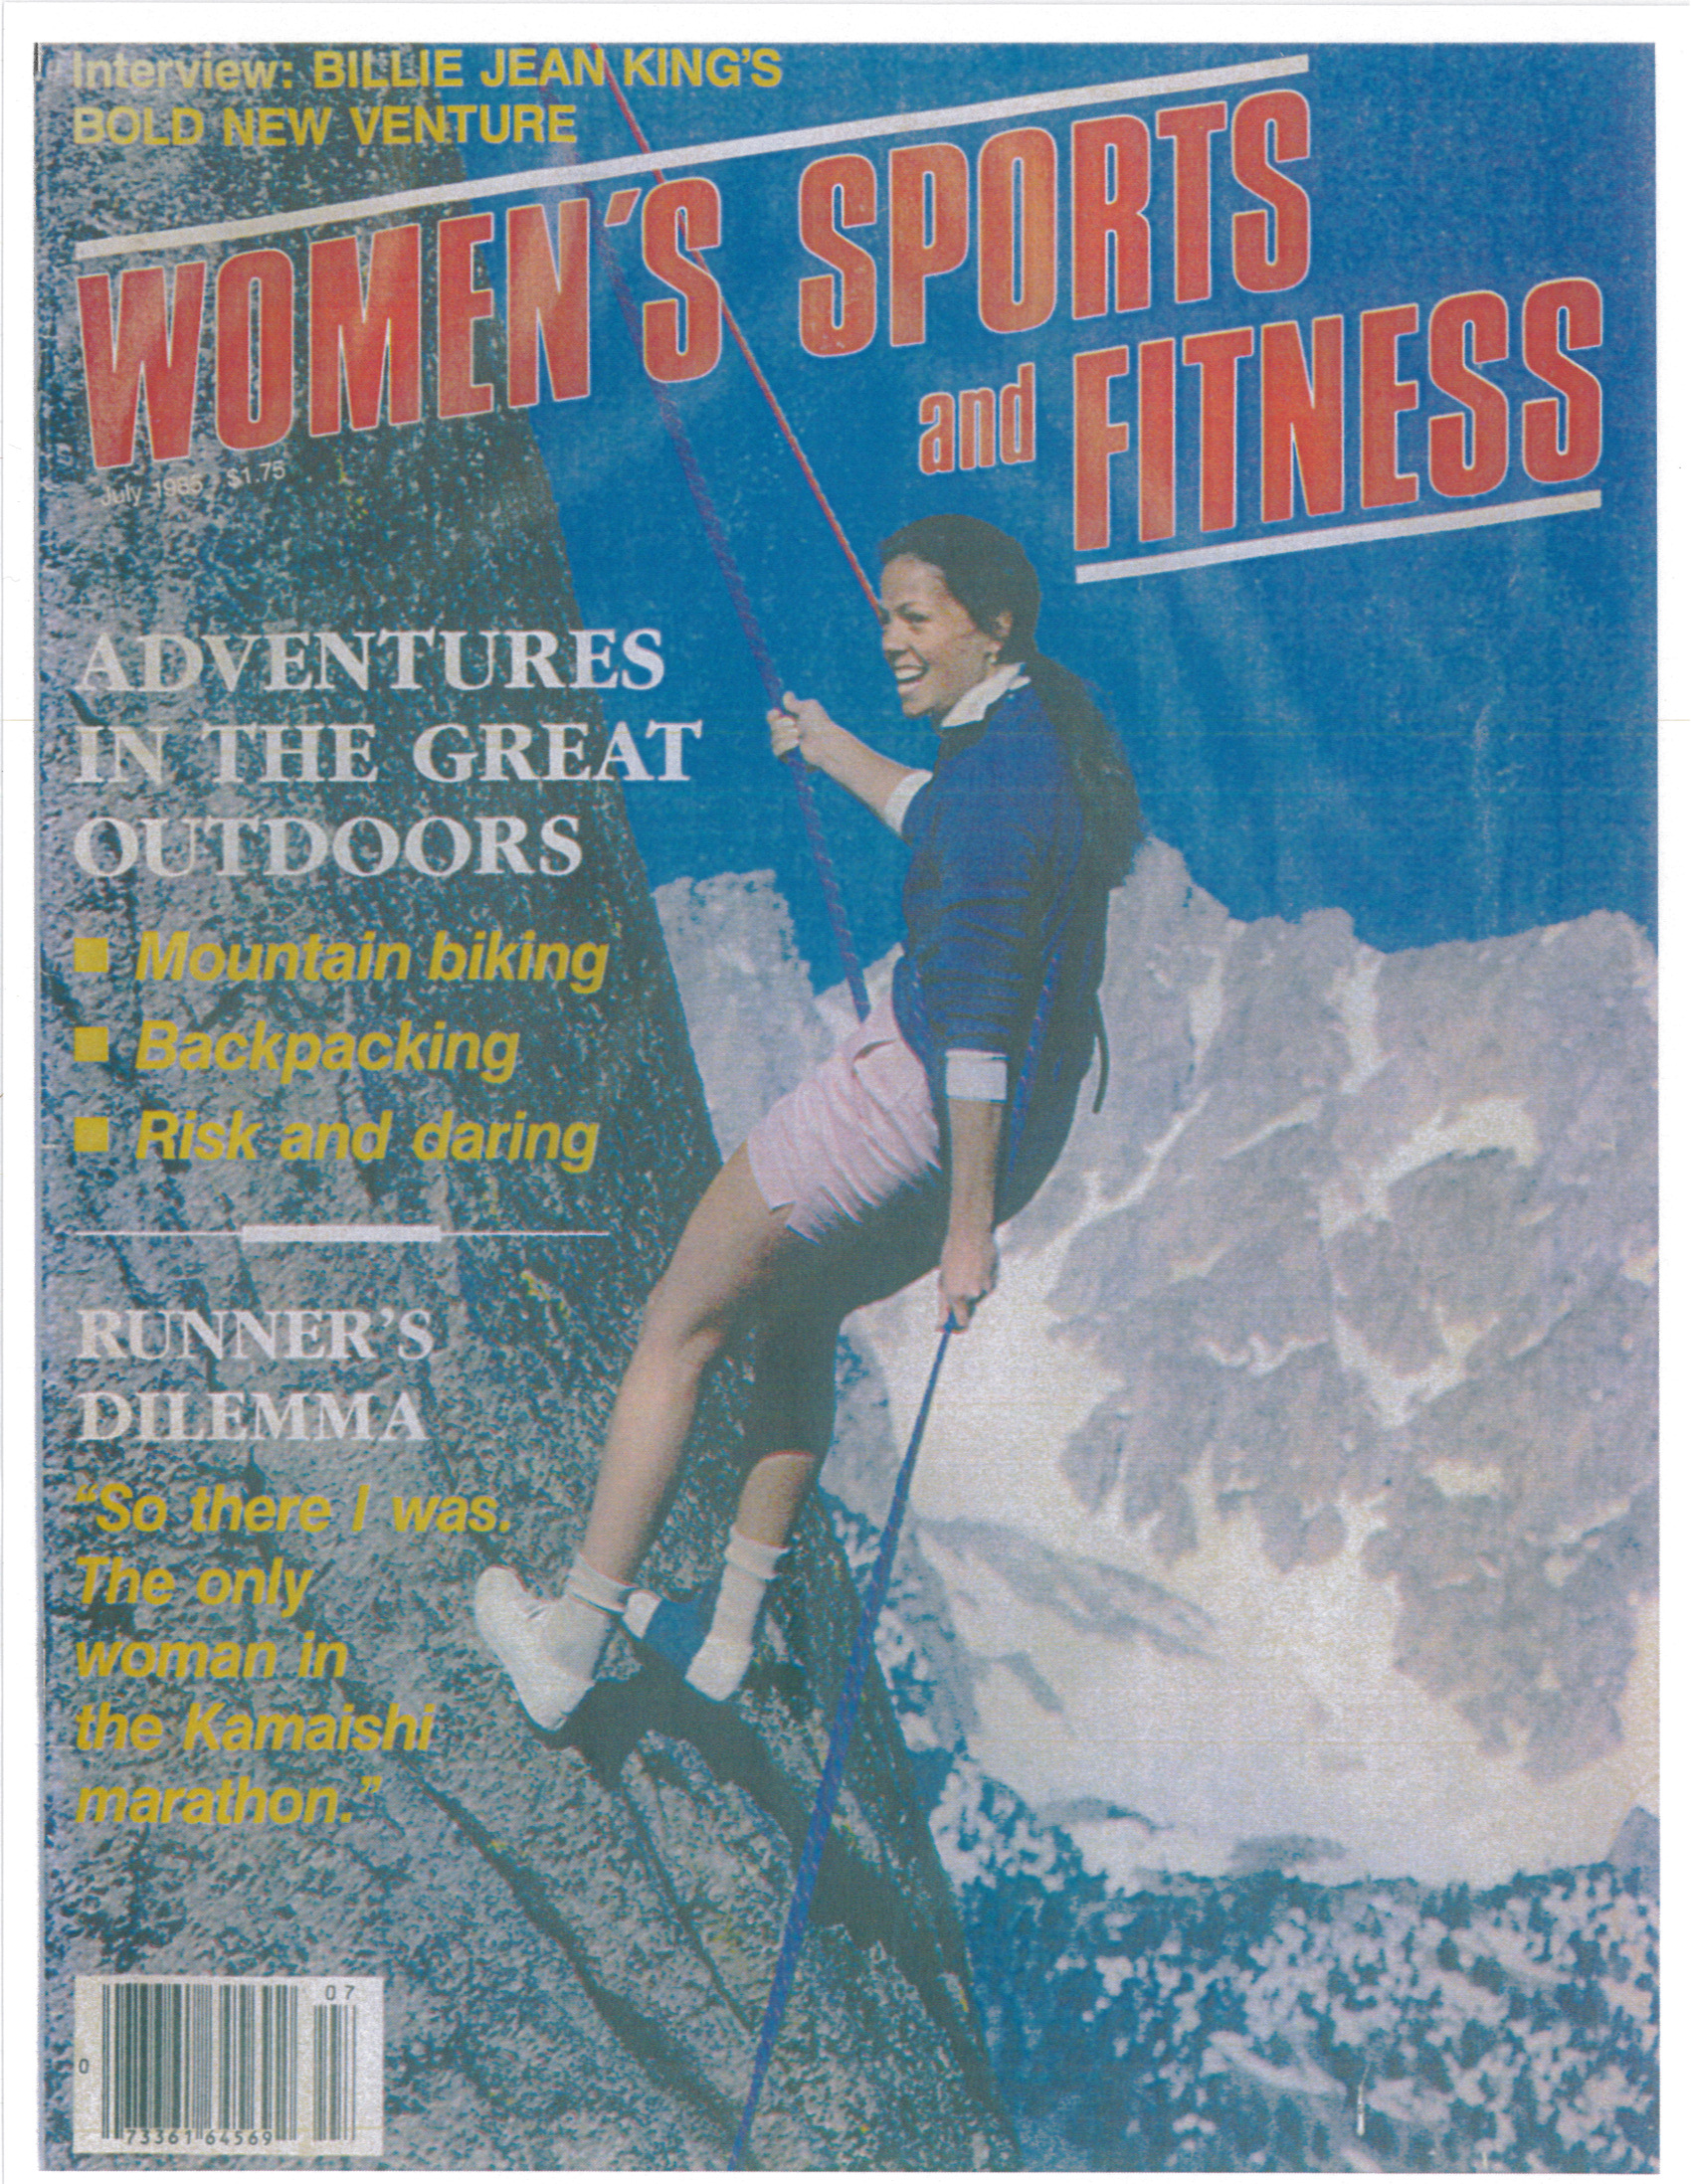 1985 Womens Sport and Fitness.jpg